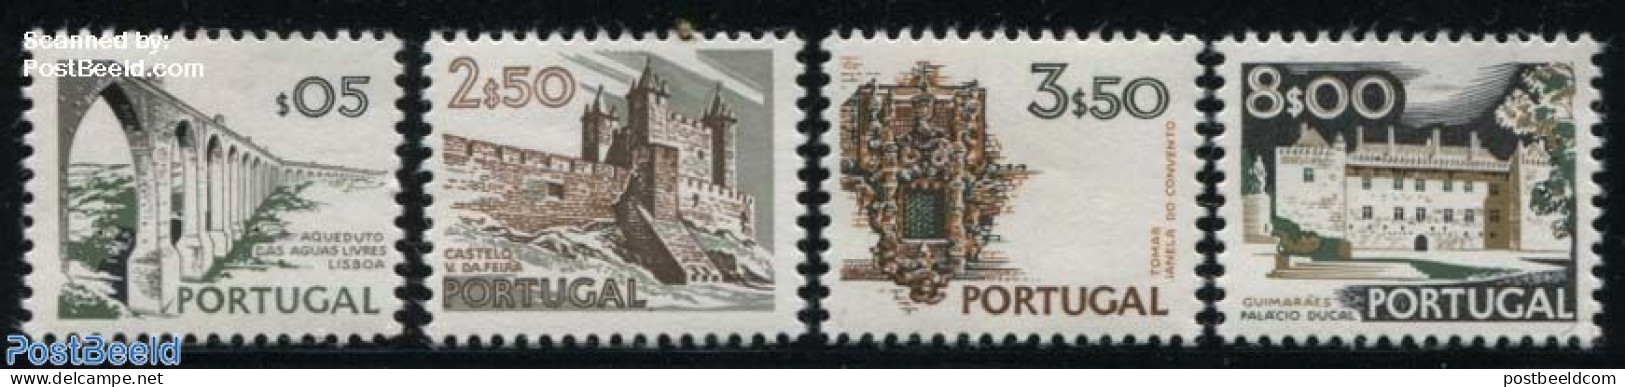 Portugal 1973 Definitives 4v, Normal Paper, Mint NH, Art - Bridges And Tunnels - Castles & Fortifications - Nuevos